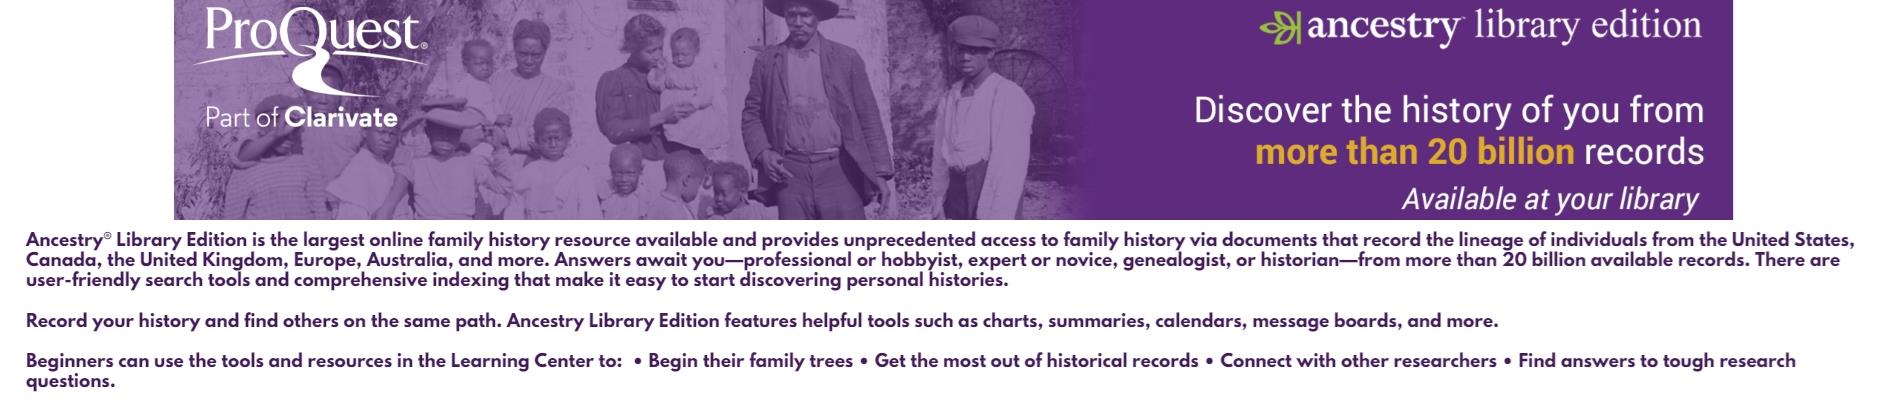 Ancestry Library Edition - Discover the history of you from more than 20 billion records. Available at your library.